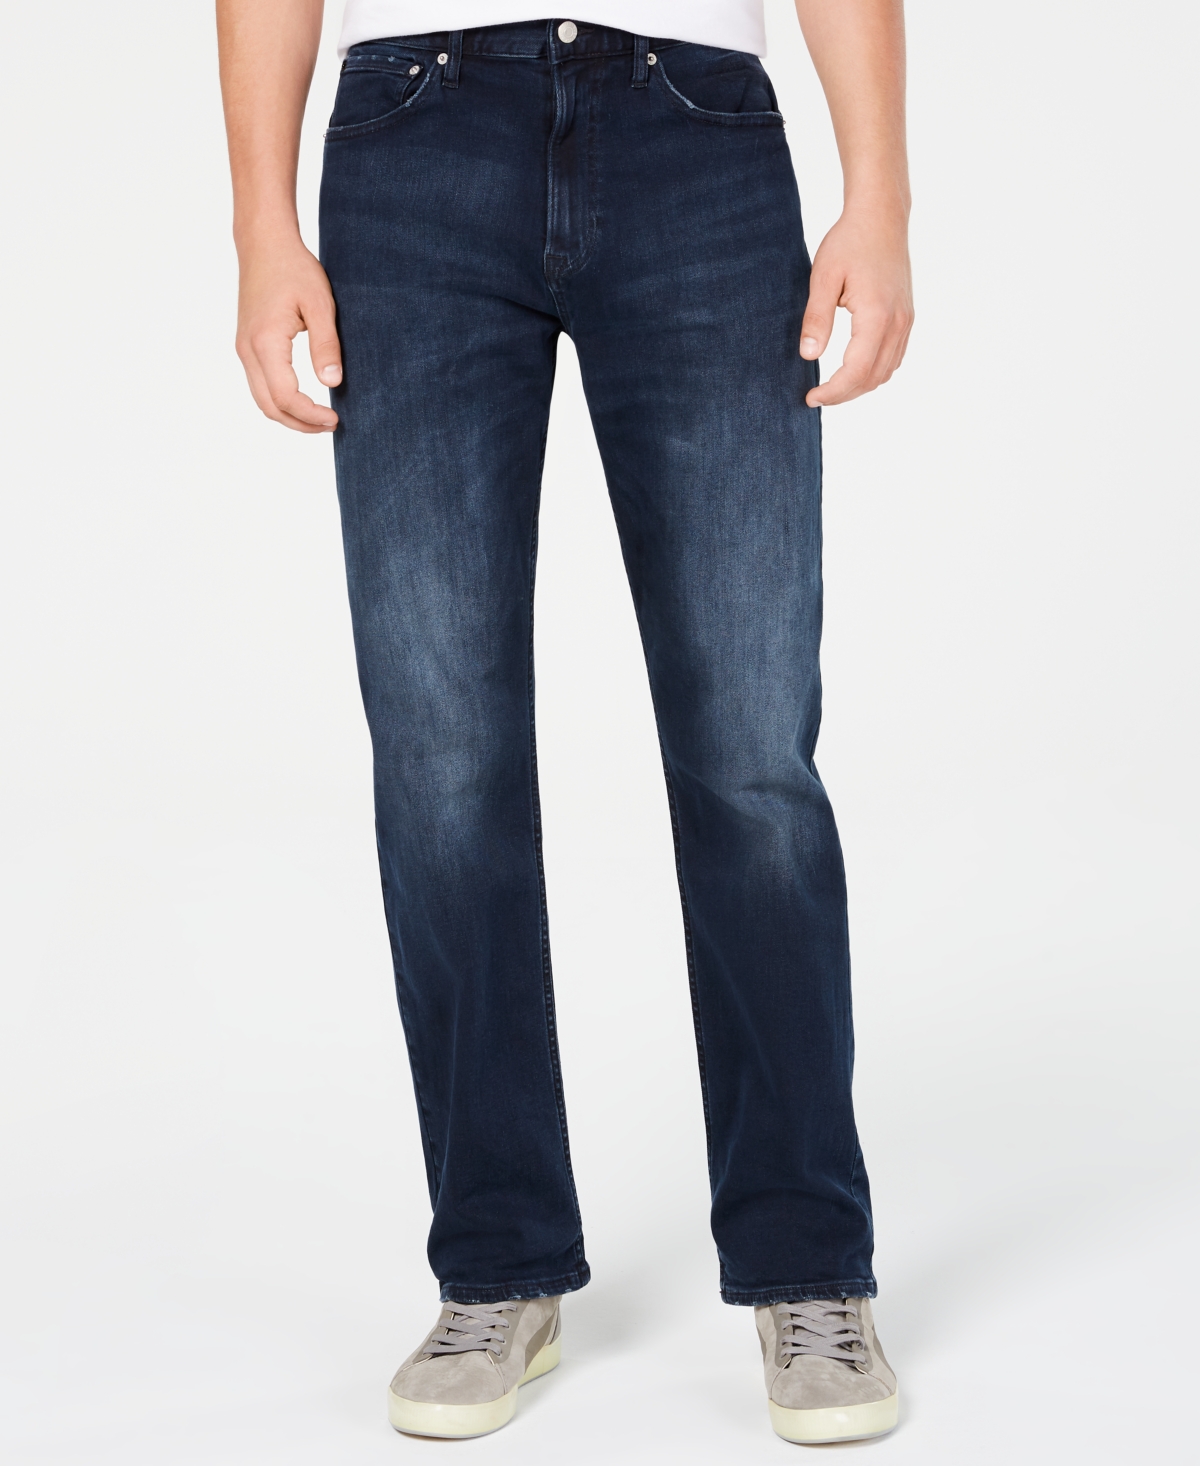 UPC 013283515420 product image for Calvin Klein Men's Straight-Fit Stretch Jeans | upcitemdb.com